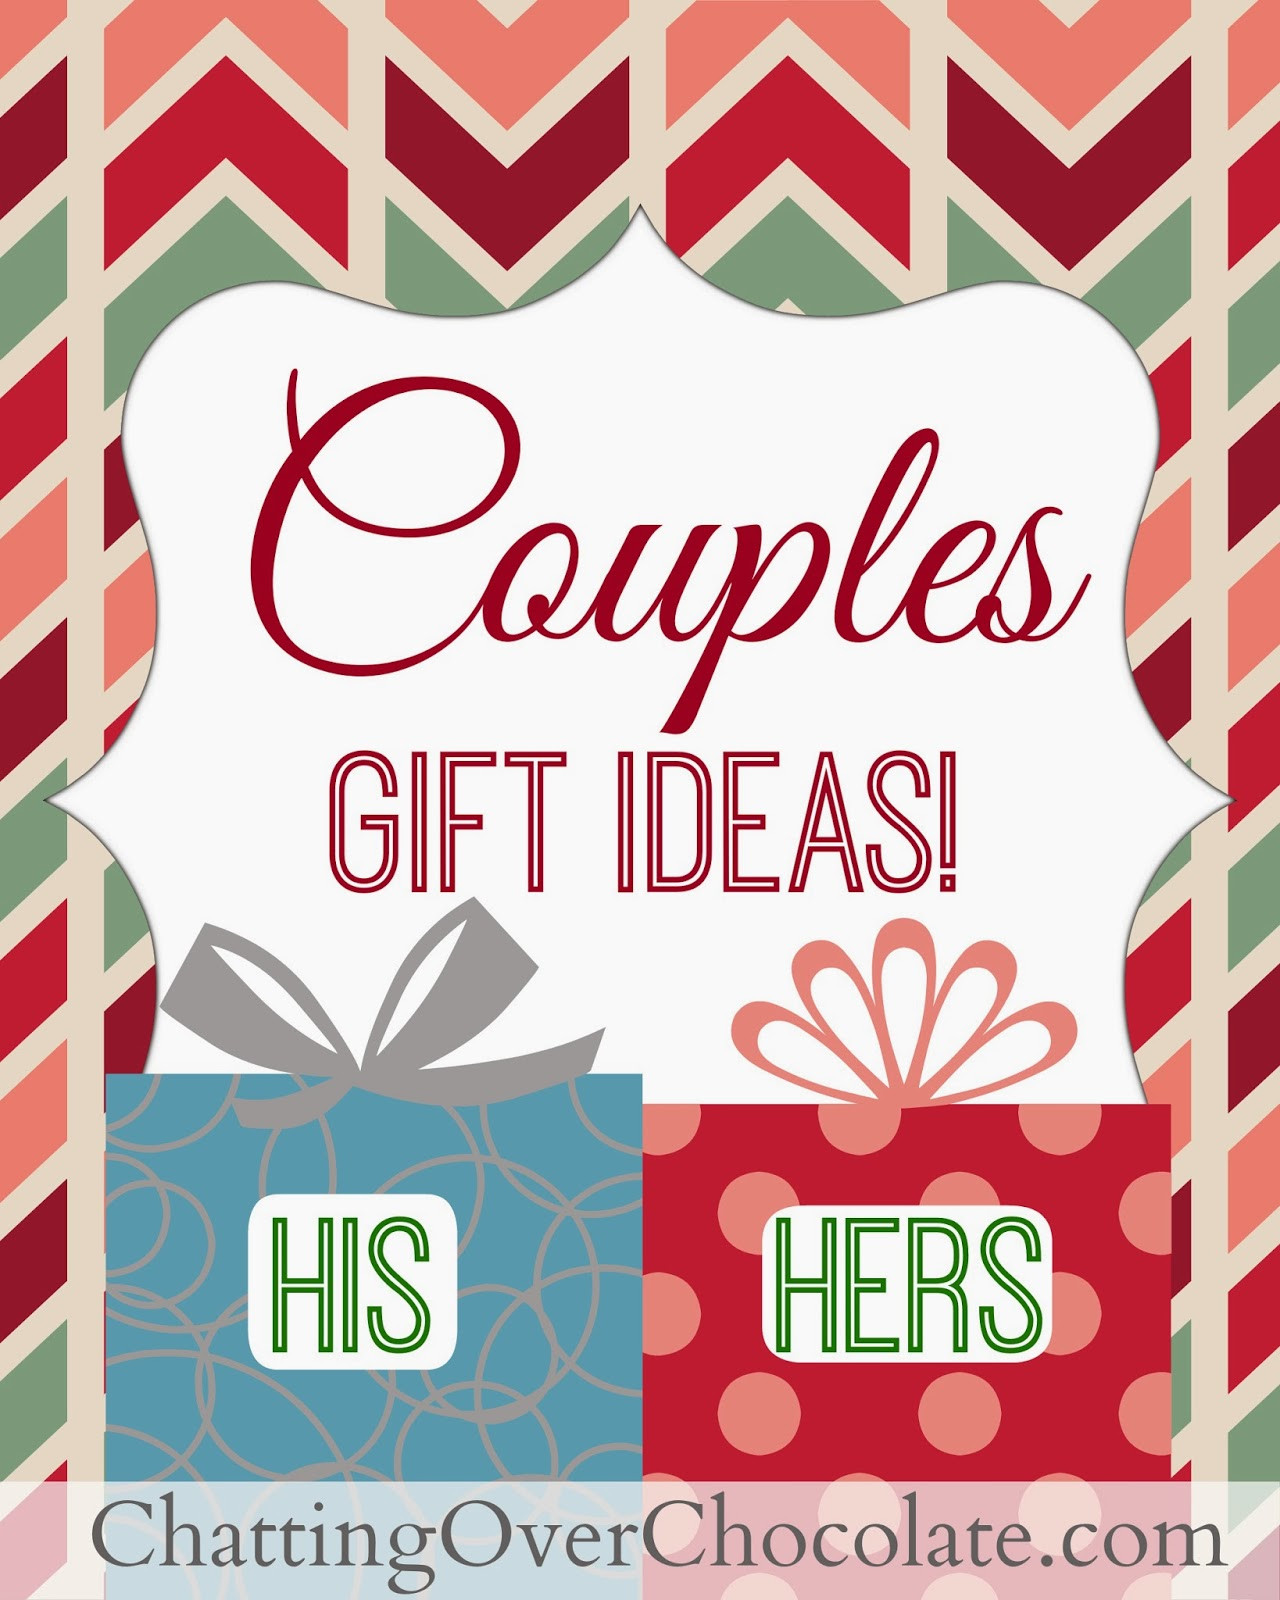 Holiday Gift Ideas For Couples
 Chatting Over Chocolate His & Hers Gift Ideas Couples